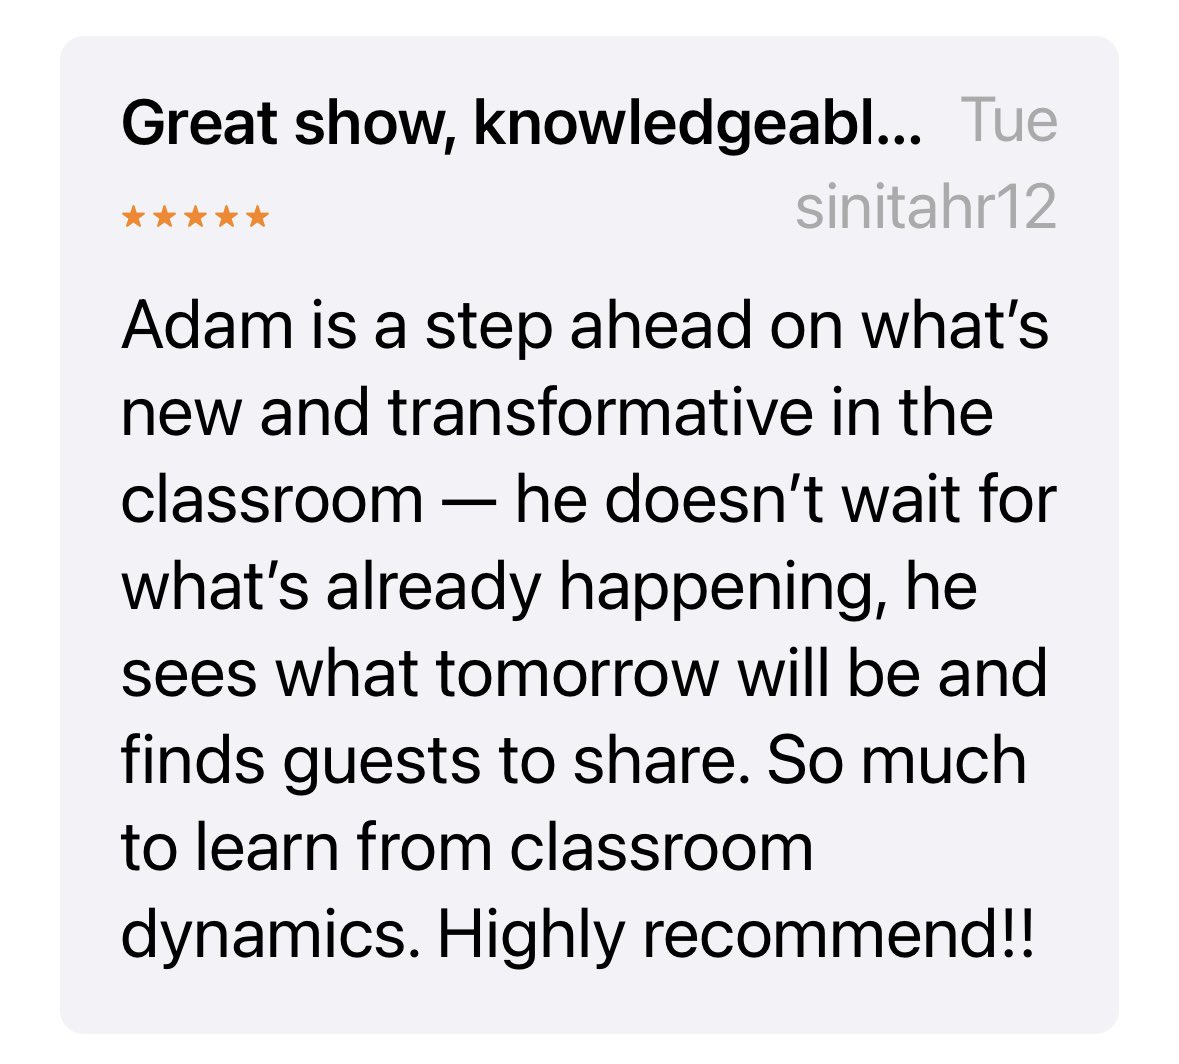 Doing what we love is why we do it. Getting feedback like this is just the cherry on top! #edchat #edtech #education #teachers #teacherlife #edupodcast 🎧 🎙️ here: …assroomdynamicspodcast.buzzsprout.com/share